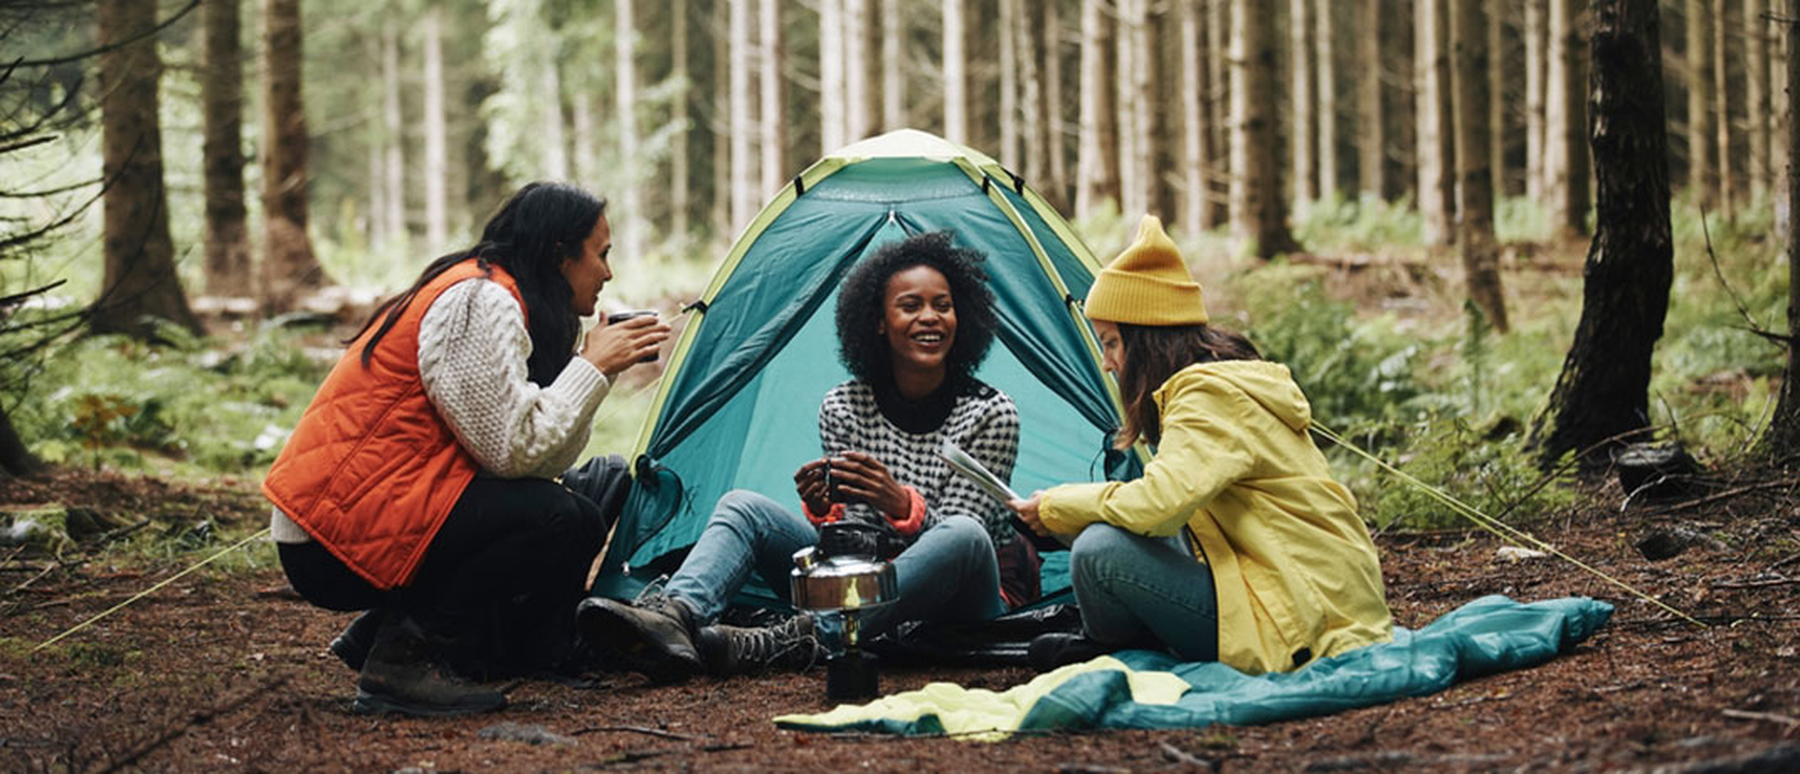 Camp is Now in Session with Labor Day Deals on Camping Gear